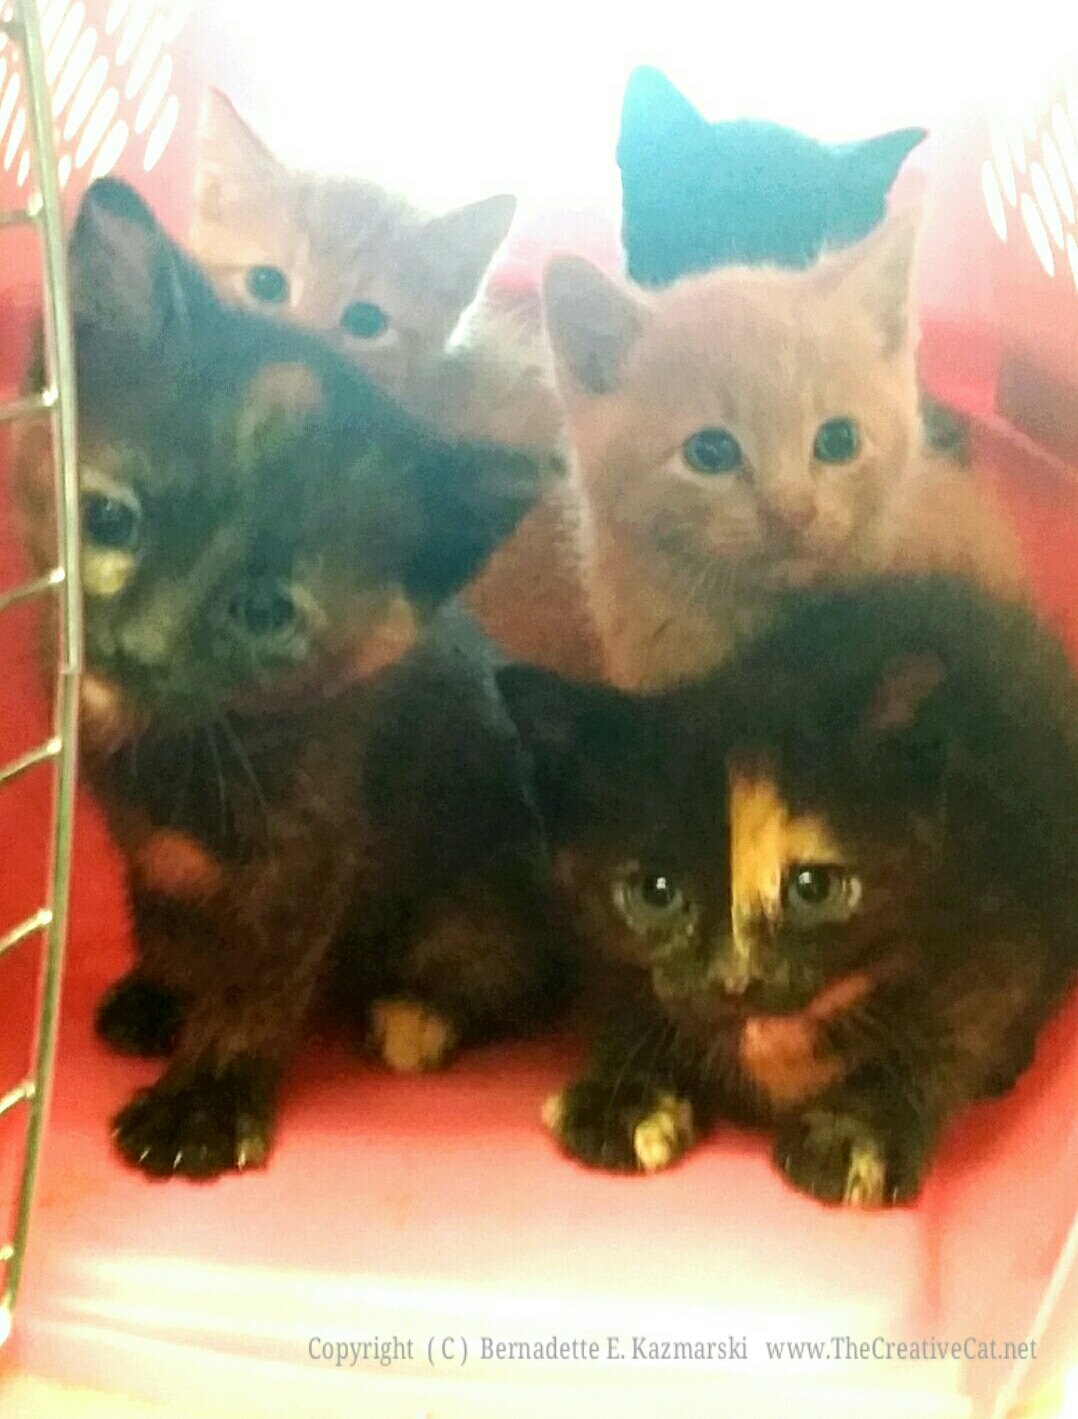 Five kittens from one place.